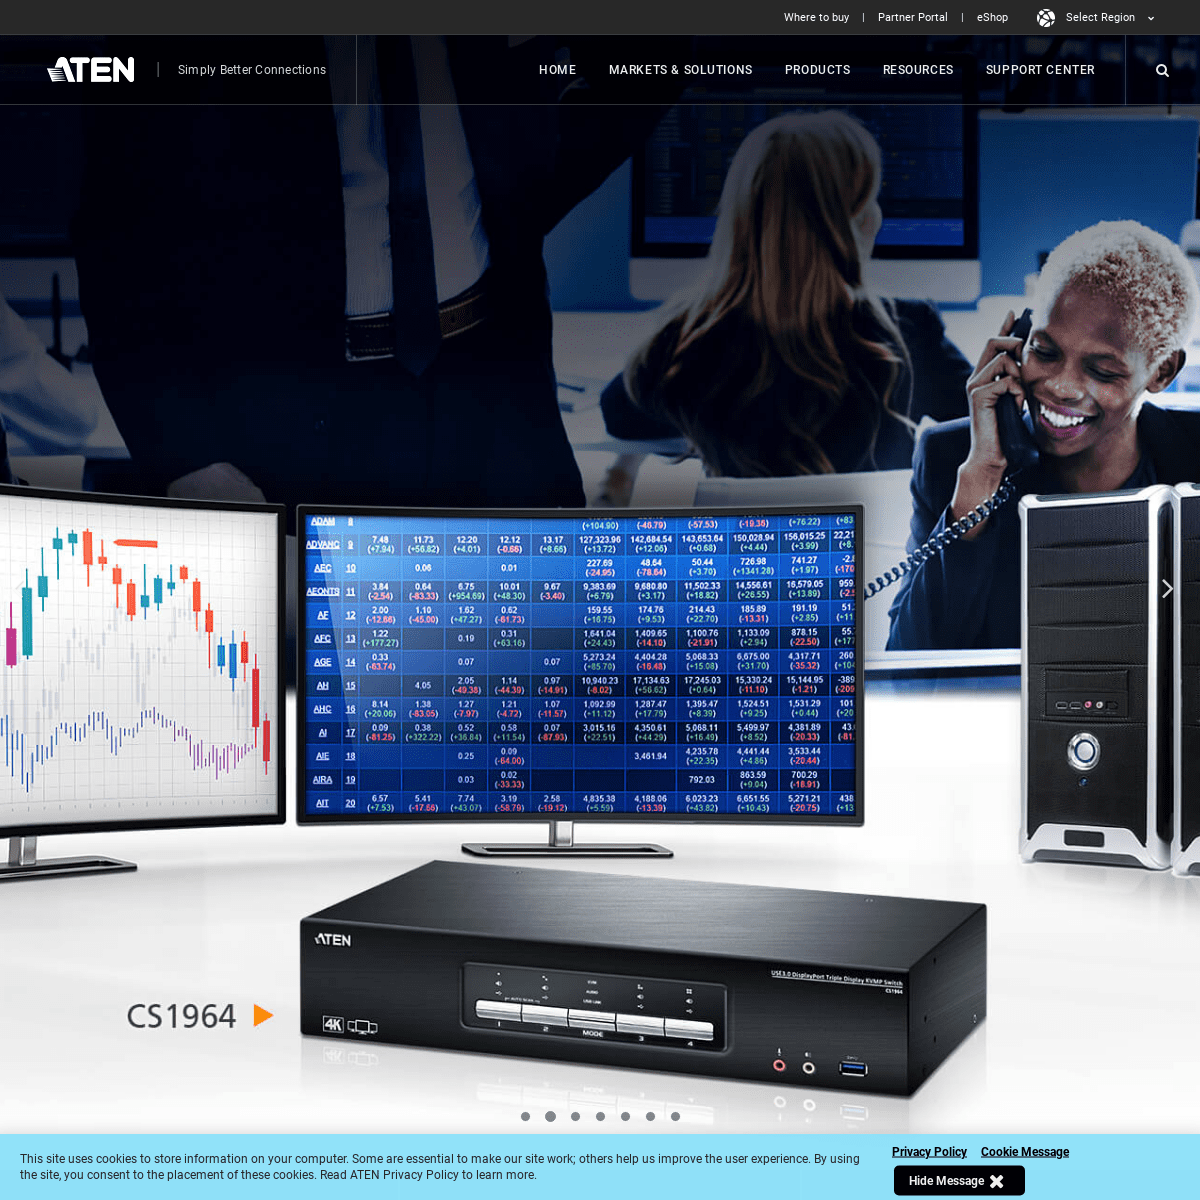 A complete backup of aten.com